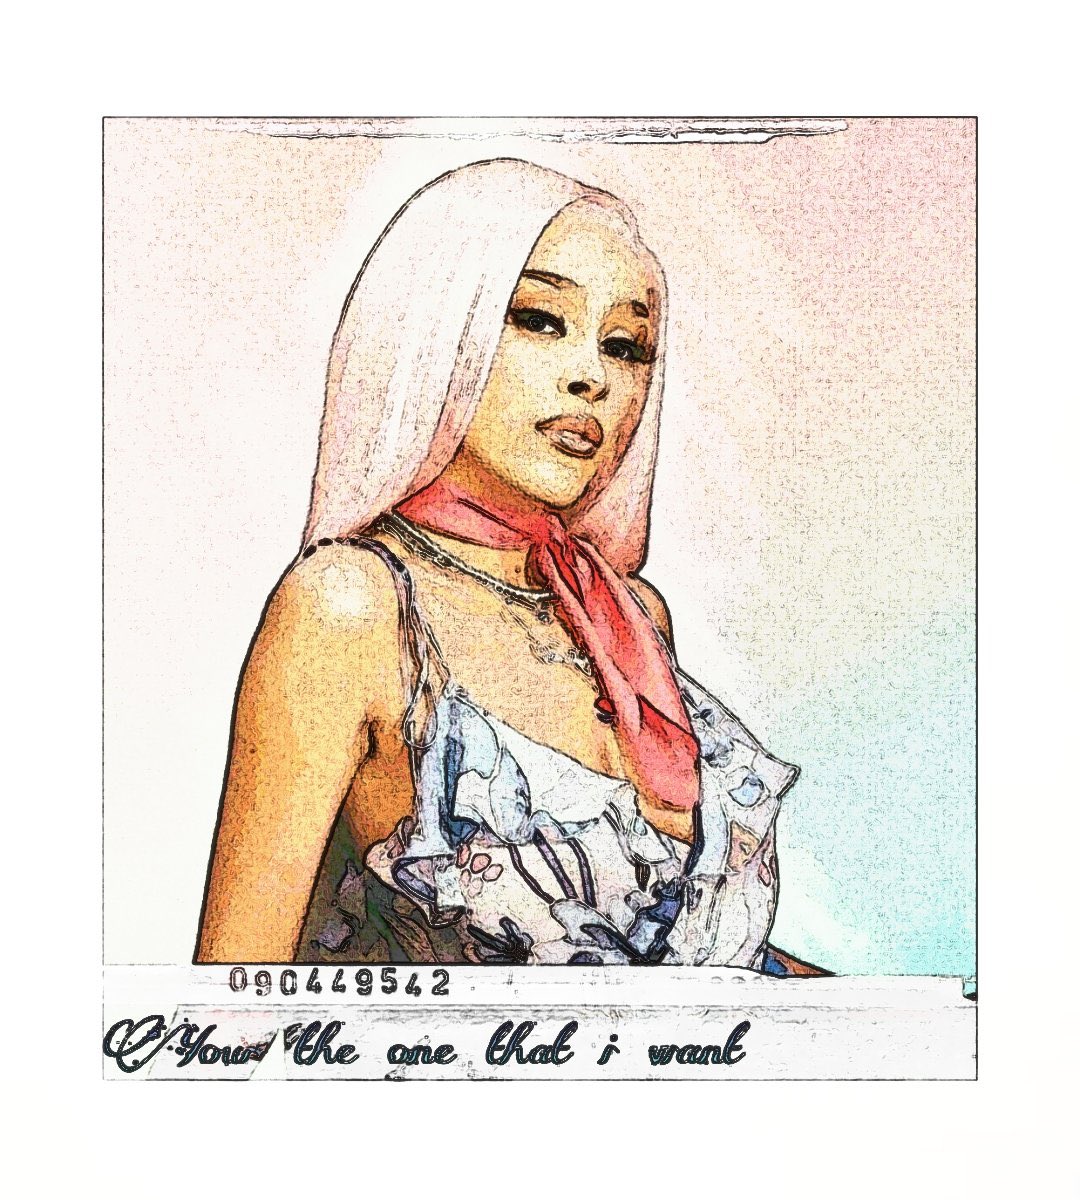 .@DojaCat, can you please drop the cover you did for PEPSICOLA commercial of the song- “Your the one that I want” on streaming platforms 

The fans need it. It will be an honor to have it in our playlist. @RCARecords @pepsi make this happen. Tysm

#YourTheOneThatIWant